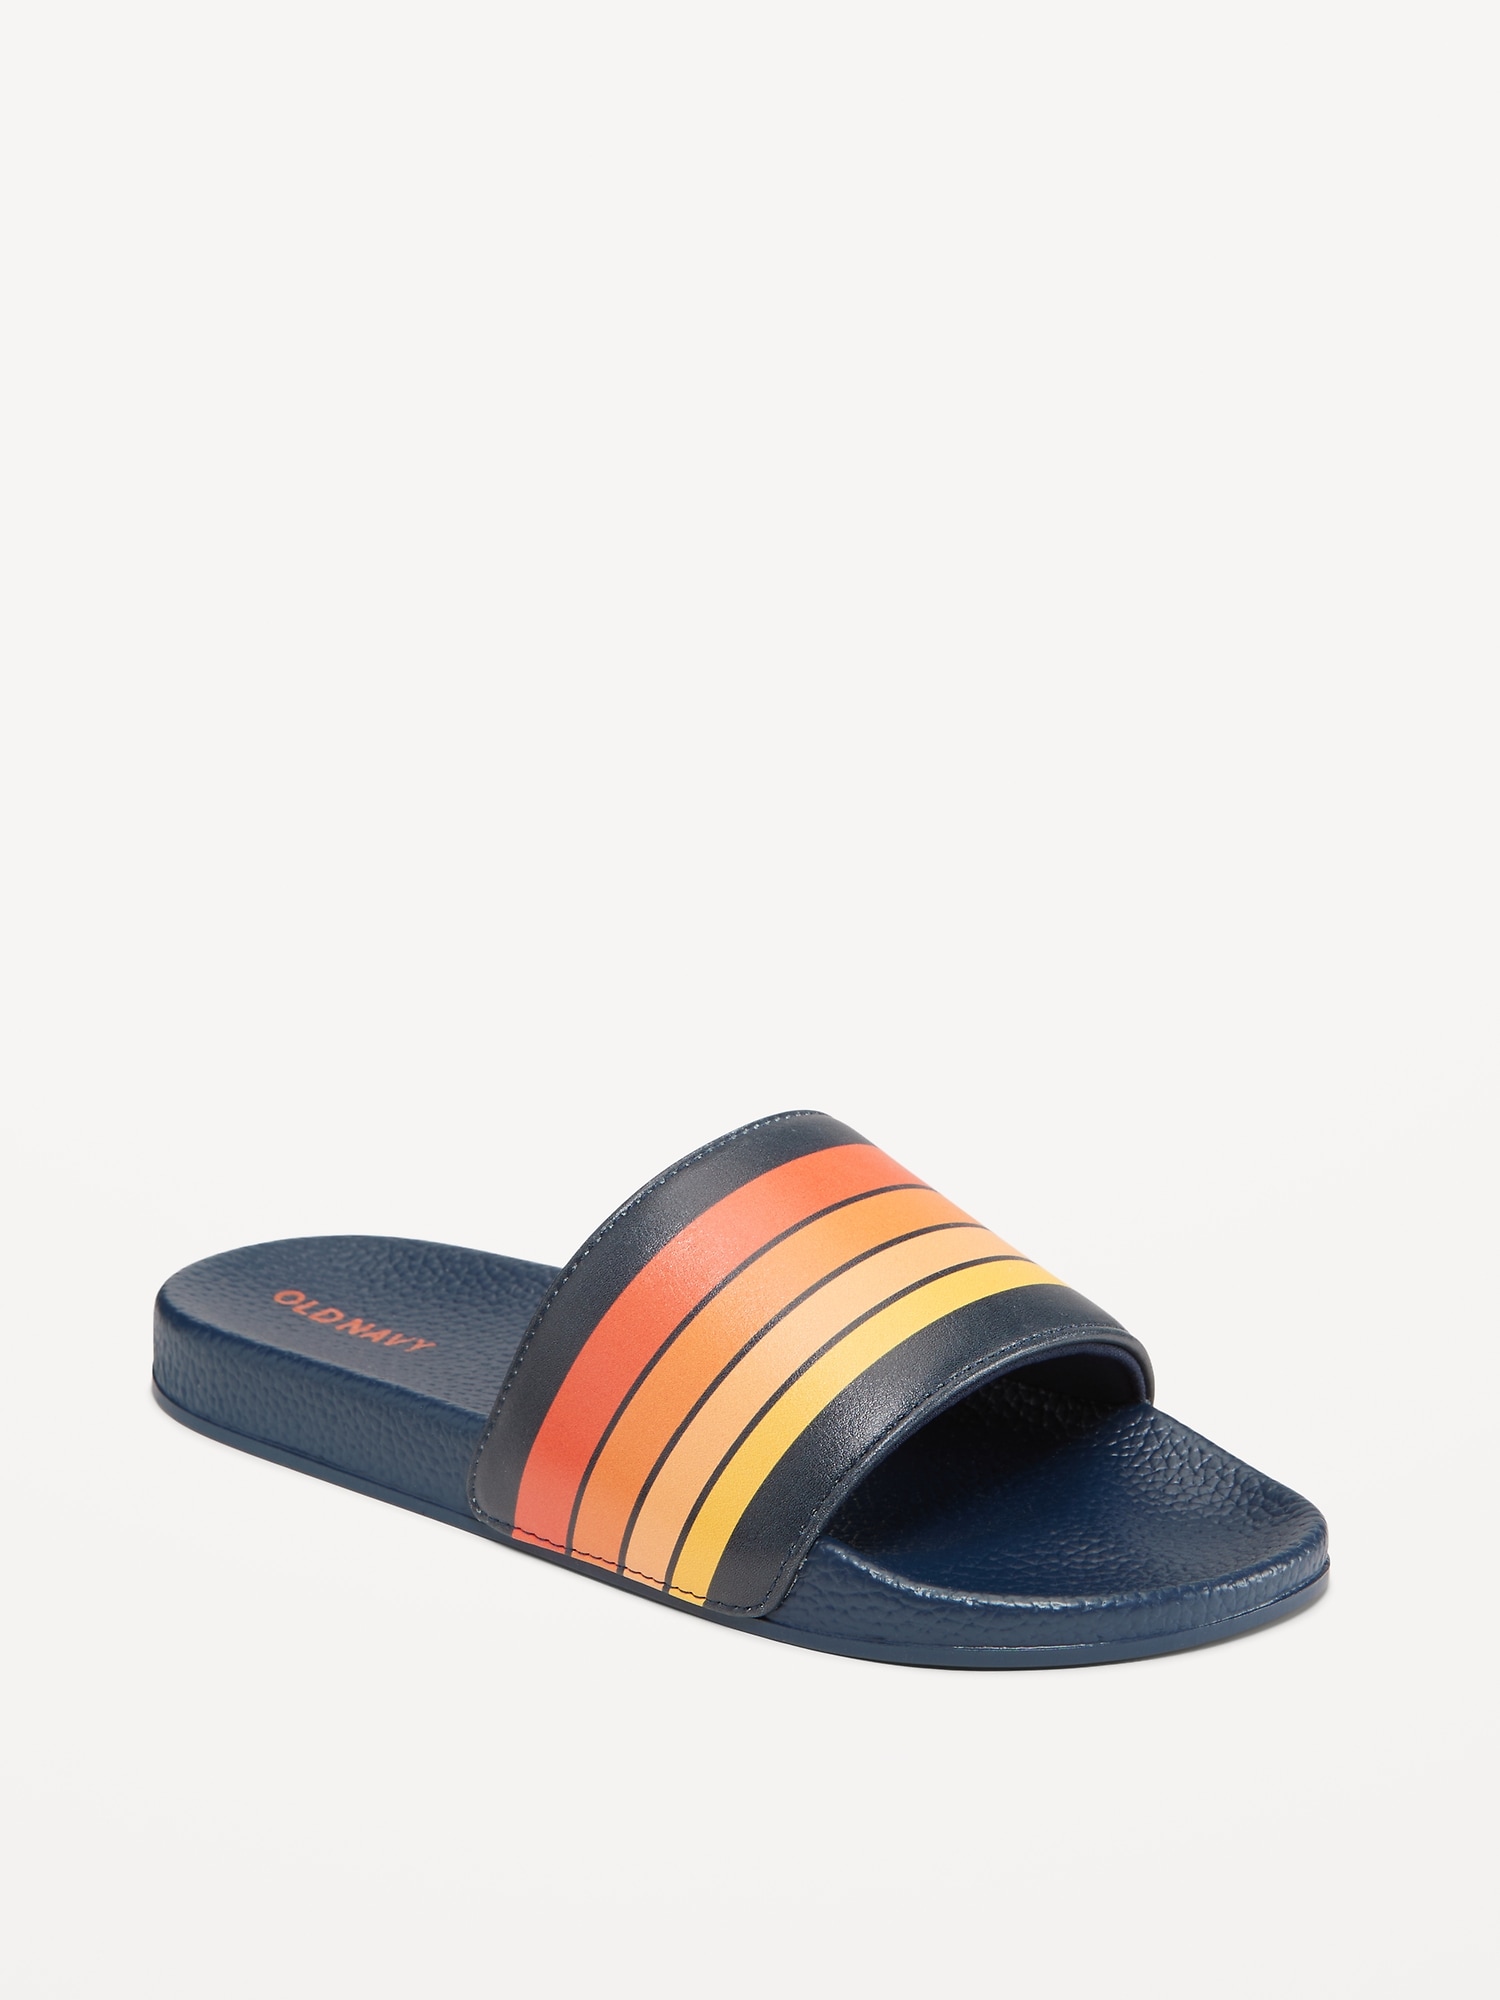 Printed Faux-Leather Pool Slide Sandals for Boys